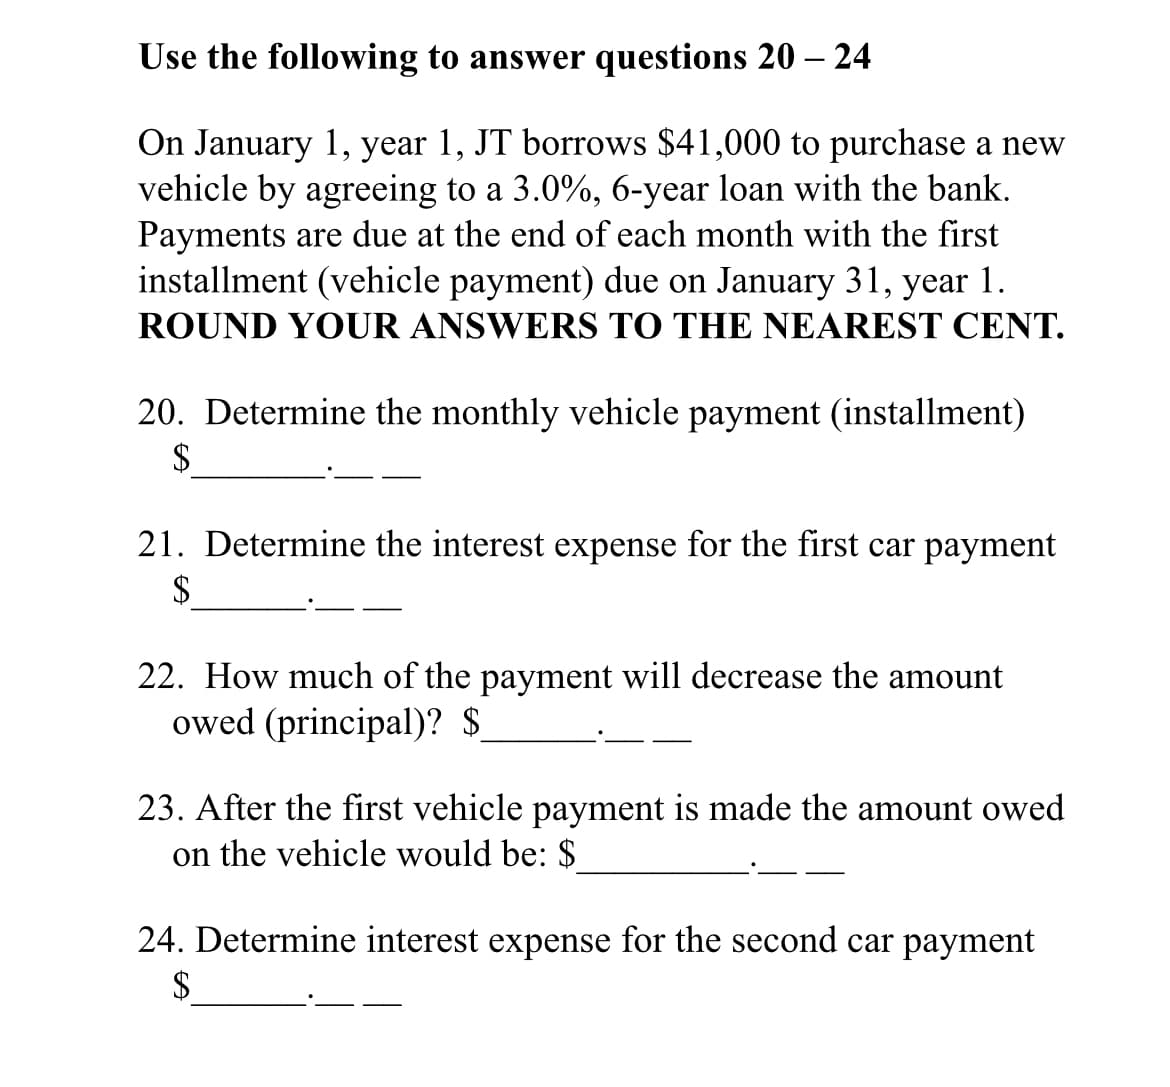 Use the following to answer questions 20 – 24
On January 1, year 1, JT borrows $41,000 to purchase a new
vehicle by agreeing to a 3.0%, 6-year loan with the bank.
Payments are due at the end of each month with the first
installment (vehicle payment) due on January 31, year 1.
ROUND YOUR ANSWERS TO THE NEAREST CENT.
20. Determine the monthly vehicle payment (installment)
$
21. Determine the interest expense for the first car payment
$
22. How much of the payment will decrease the amount
owed (principal)? $
23. After the first vehicle payment is made the amount owed
on the vehicle would be: $
24. Determine interest expense for the second car payment
$
